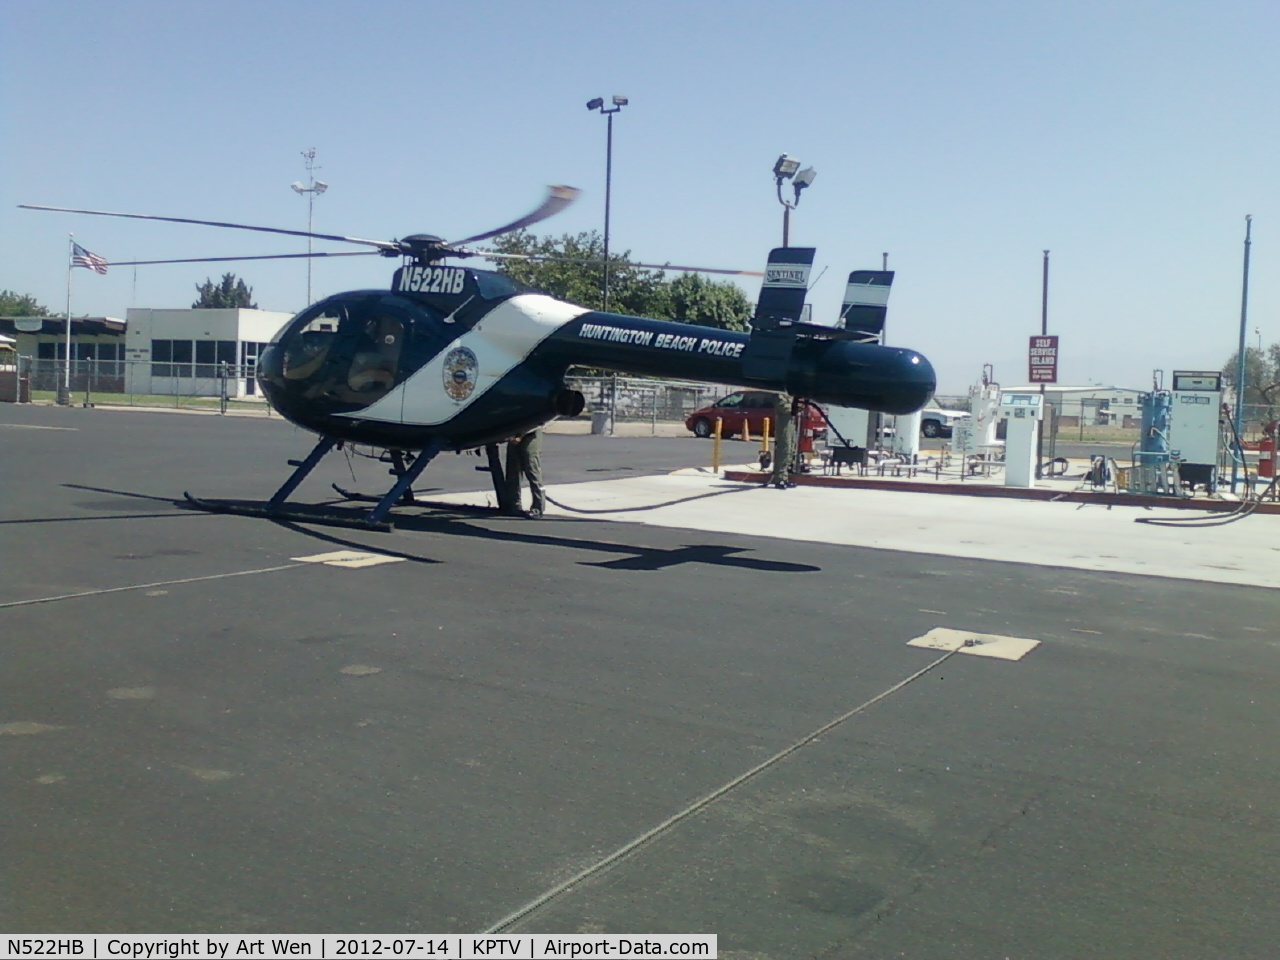 N522HB, 2001 MD Helicopters 500N C/N LN096, Porterville, CA